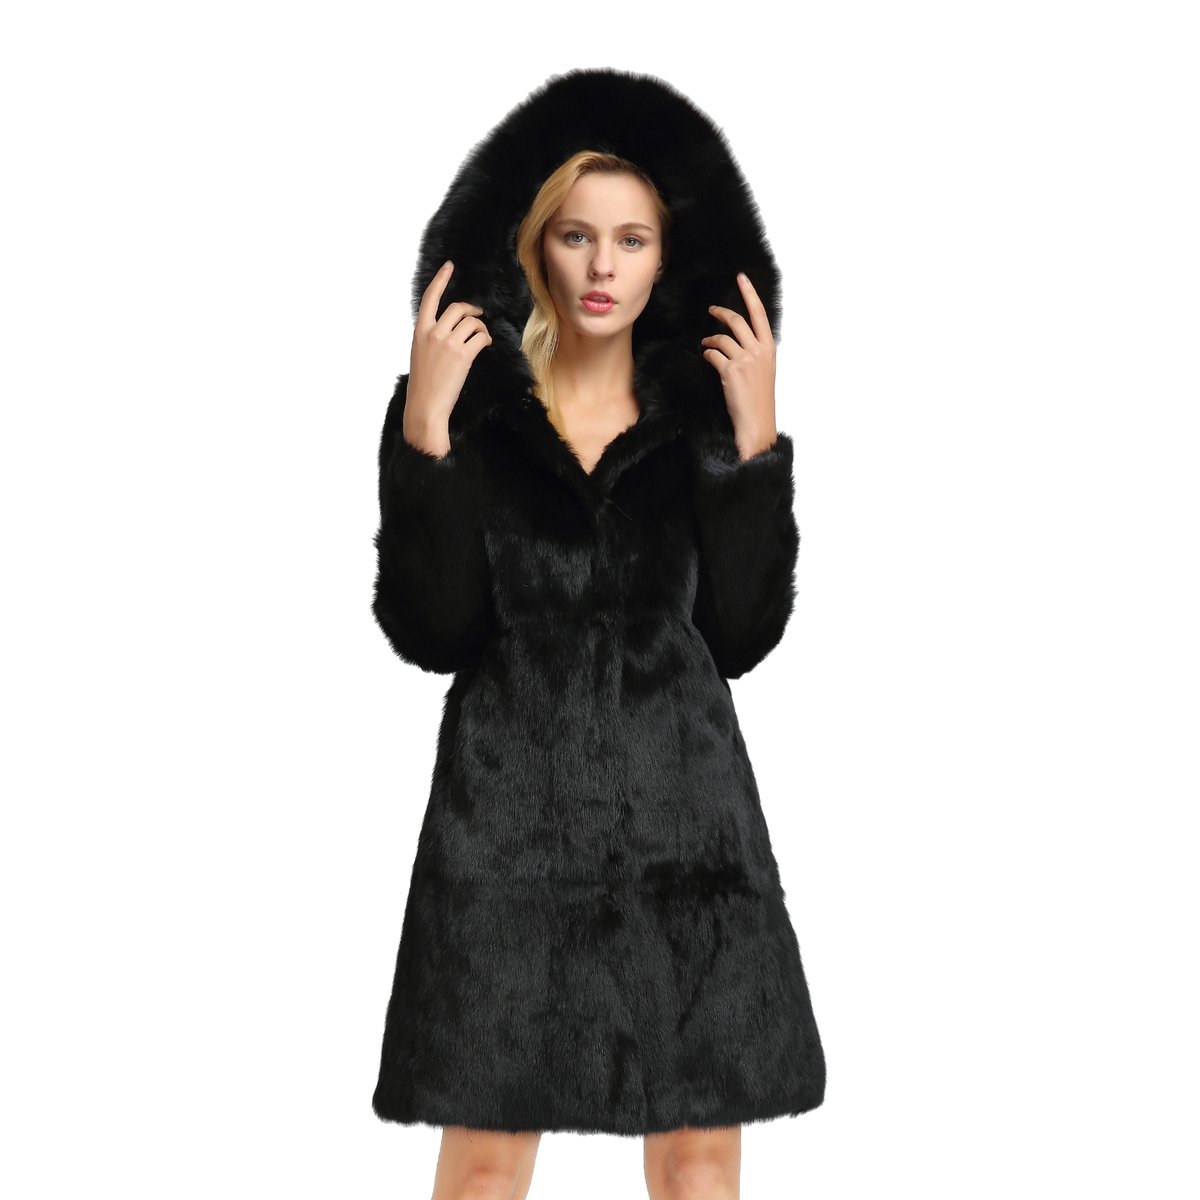 Rabbit Fur Coat For Women With Hood | 10% discount for you
n9.cl/jn9fy

#nuozhi #fur #winteroutfitideas #winterfashion #wintersun #winteriscoming #winter2023 #furcoatwomen #furcoatwomenatwomen #christmas2023 #christmasgifts #christmastime #rabbitfur #rabbitlove